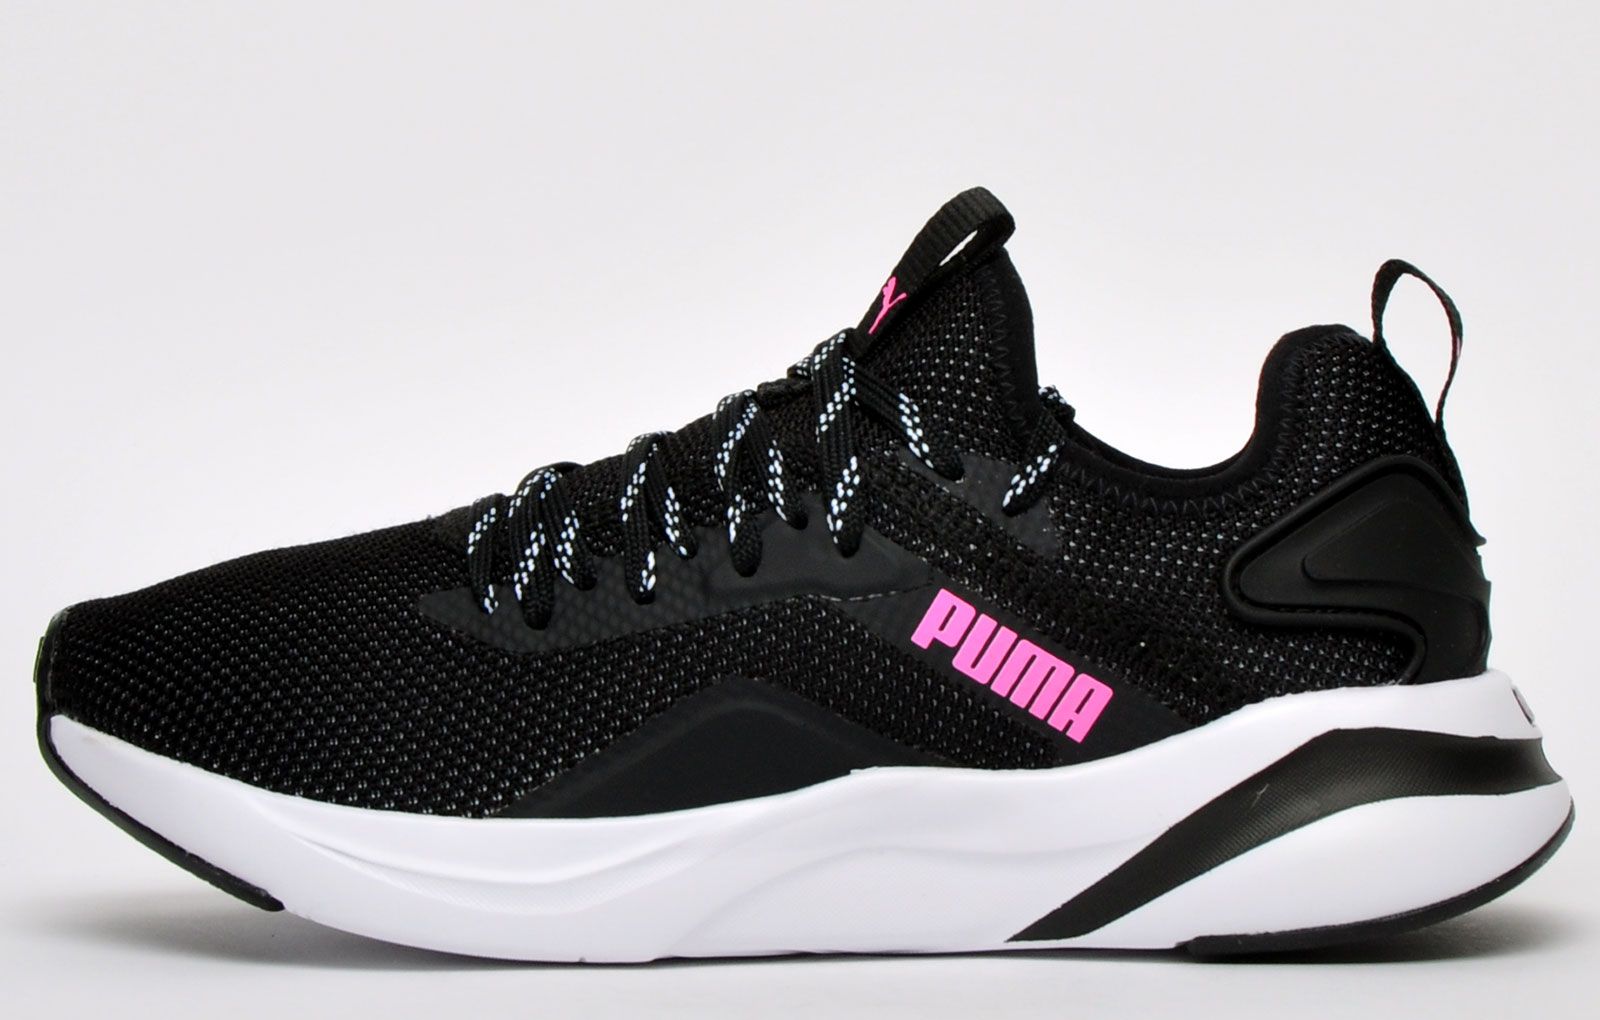 These Puma SoftRide running shoes for women are a great all round running/fitness trainer  crafted with a bootie-like textile knit upper sitting on top a full length Softride cushioned midsole for the ultimate in comfort and support. 
 Running shoes contain Softfoam insoles for the added touch of comfort as well as a heel and tongue pull tab for easy on off wear, to summarise  these SoftRide running shoes from Puma deliver on all fronts and all at a price which wont hurt your pocket. 
 - Bootie like construction
 - Secure up front lacing system 
 - Textile knit upper 
 - Full length SoftRide midsole cushioning 
 - SoftFoam insole offers comfort 
 - Heel and tongue loop for easy on/off wear.
 - Puma branding throughout